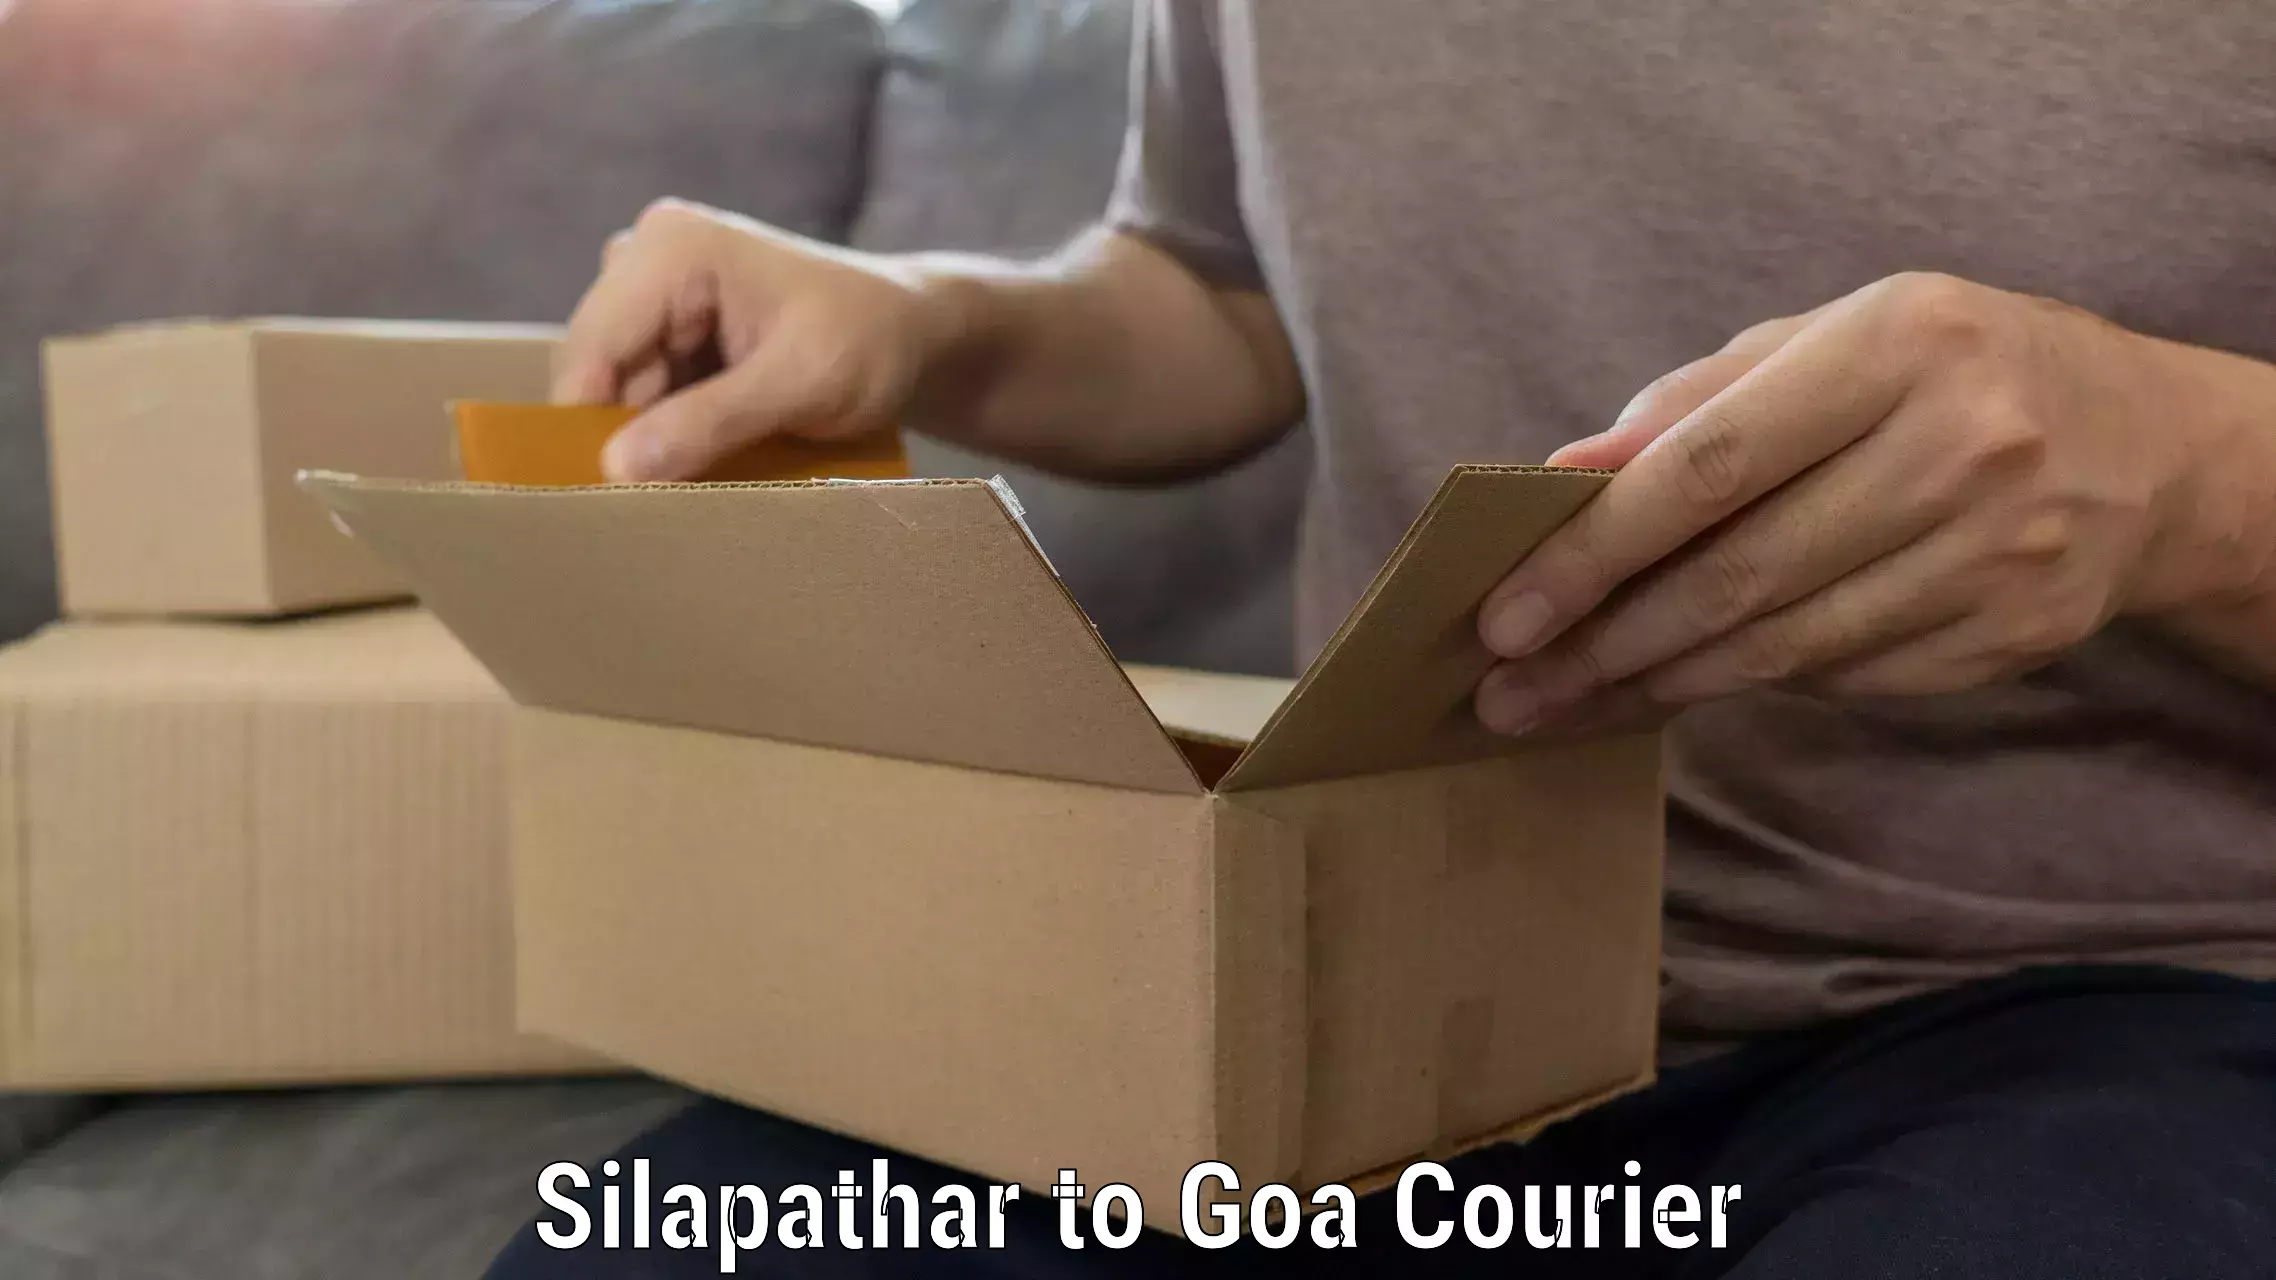 Furniture moving plans Silapathar to Goa